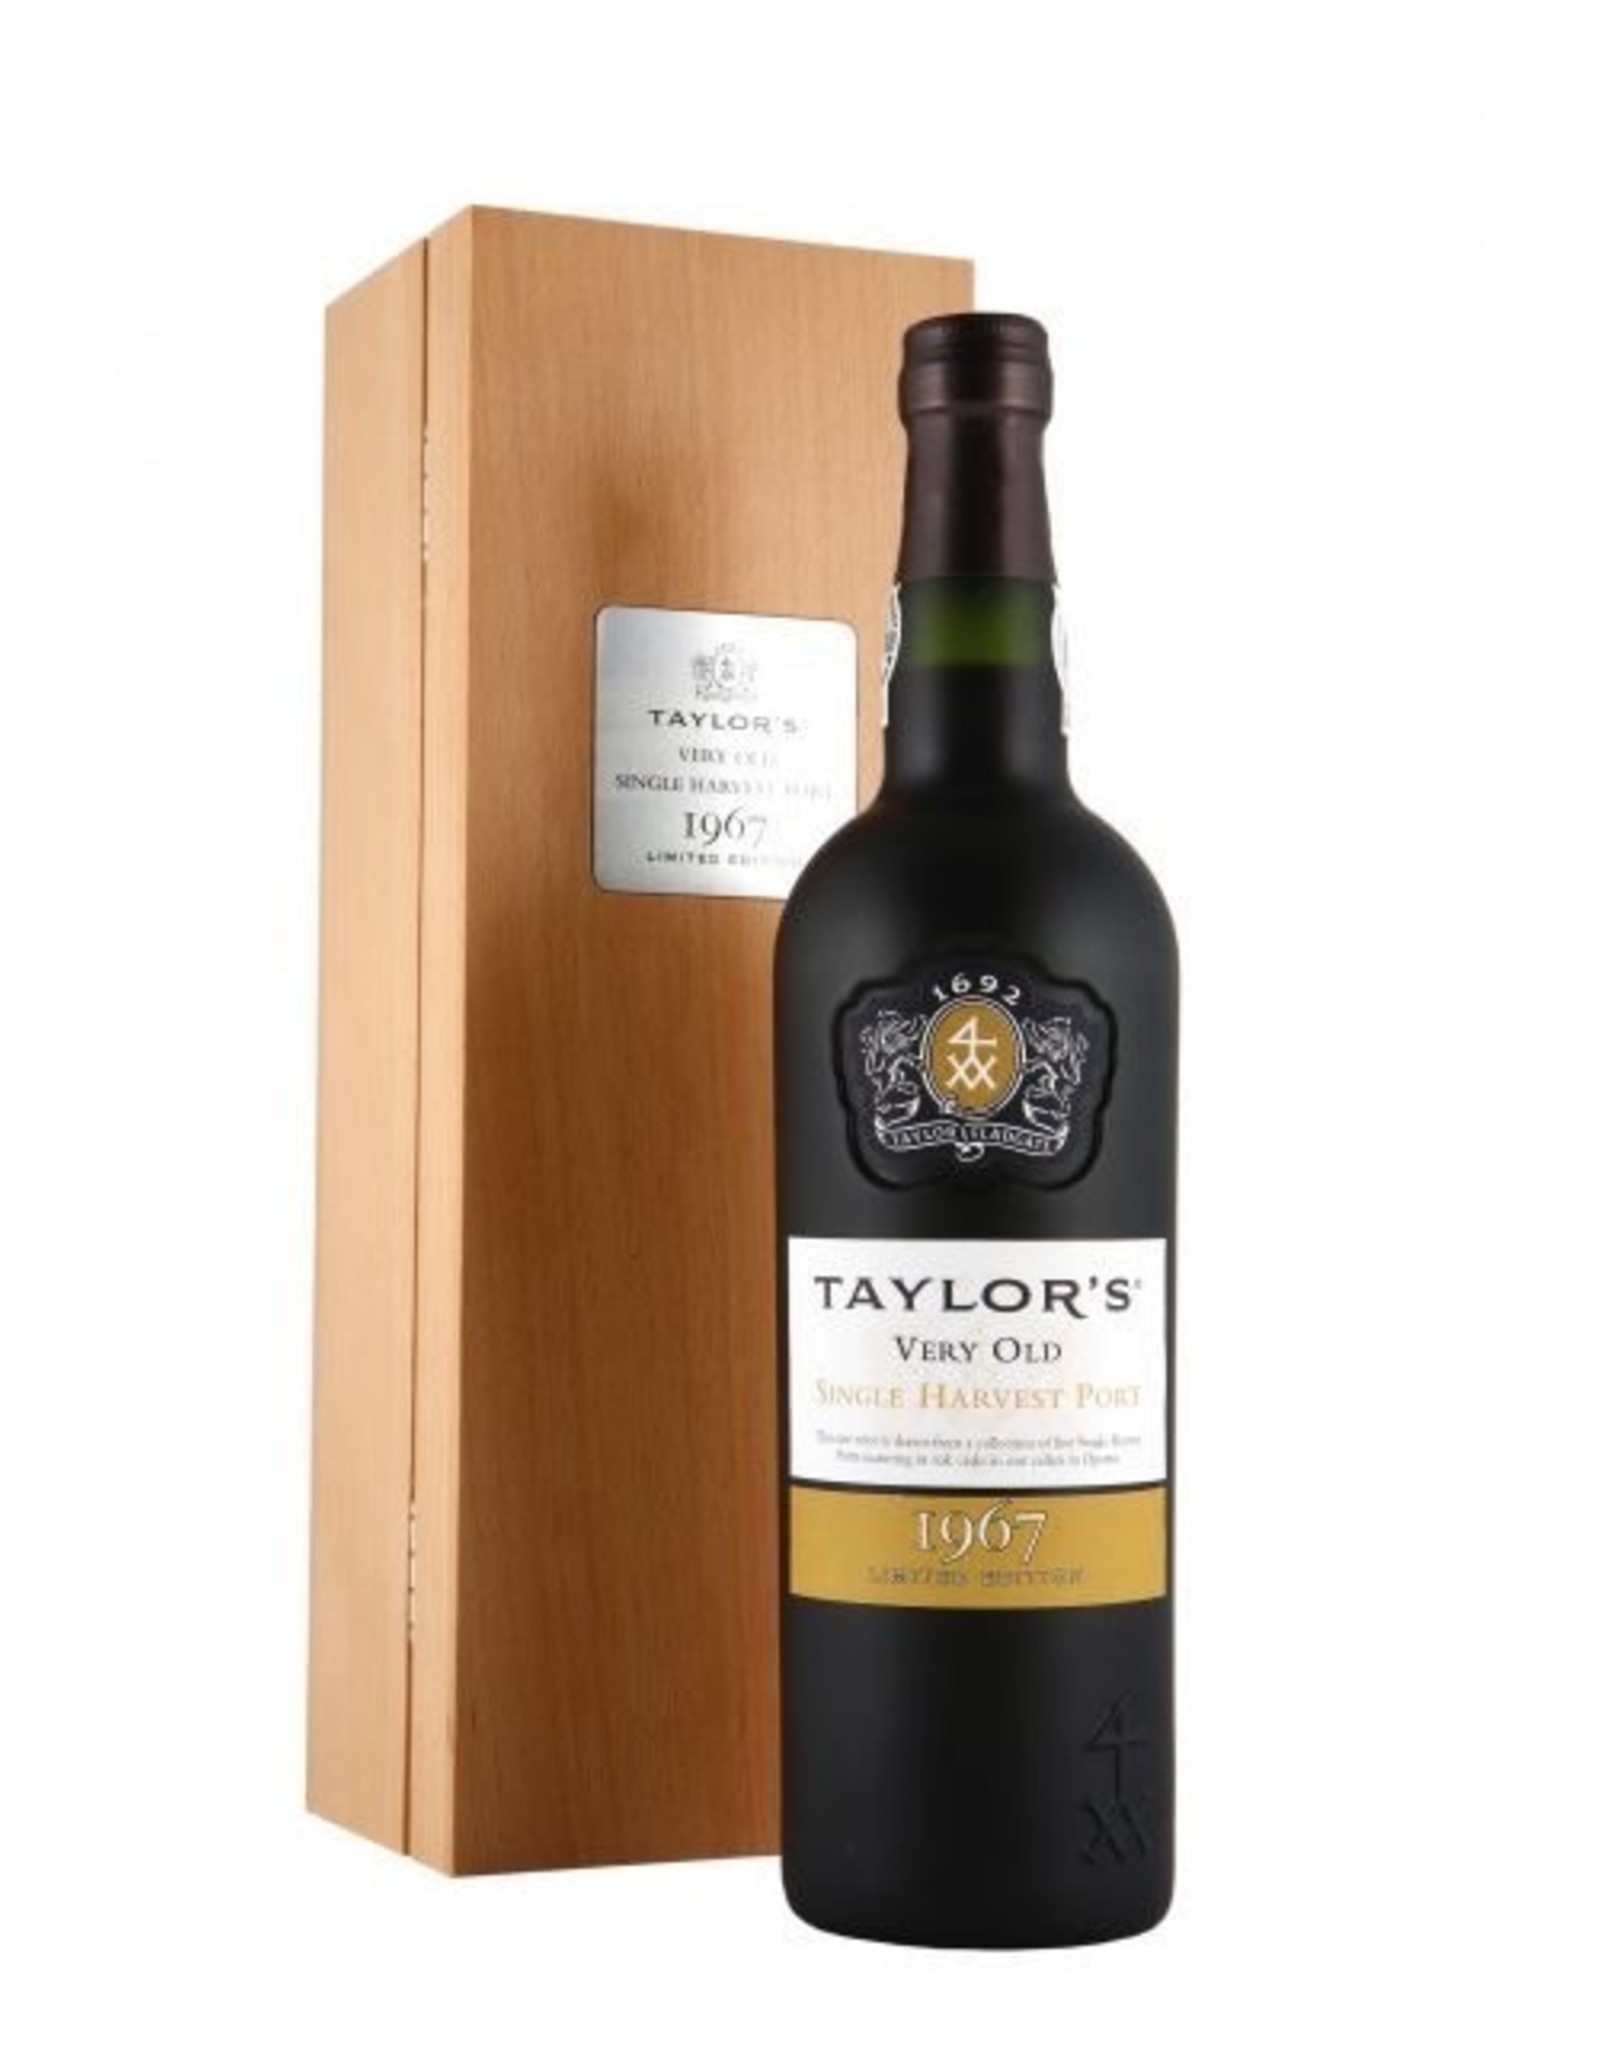 Port 1967, Taylor Fladgate Very Old Single Harvest Port, Port, Douro Valley, Oporto, Portugal, 20% Alc, CT94